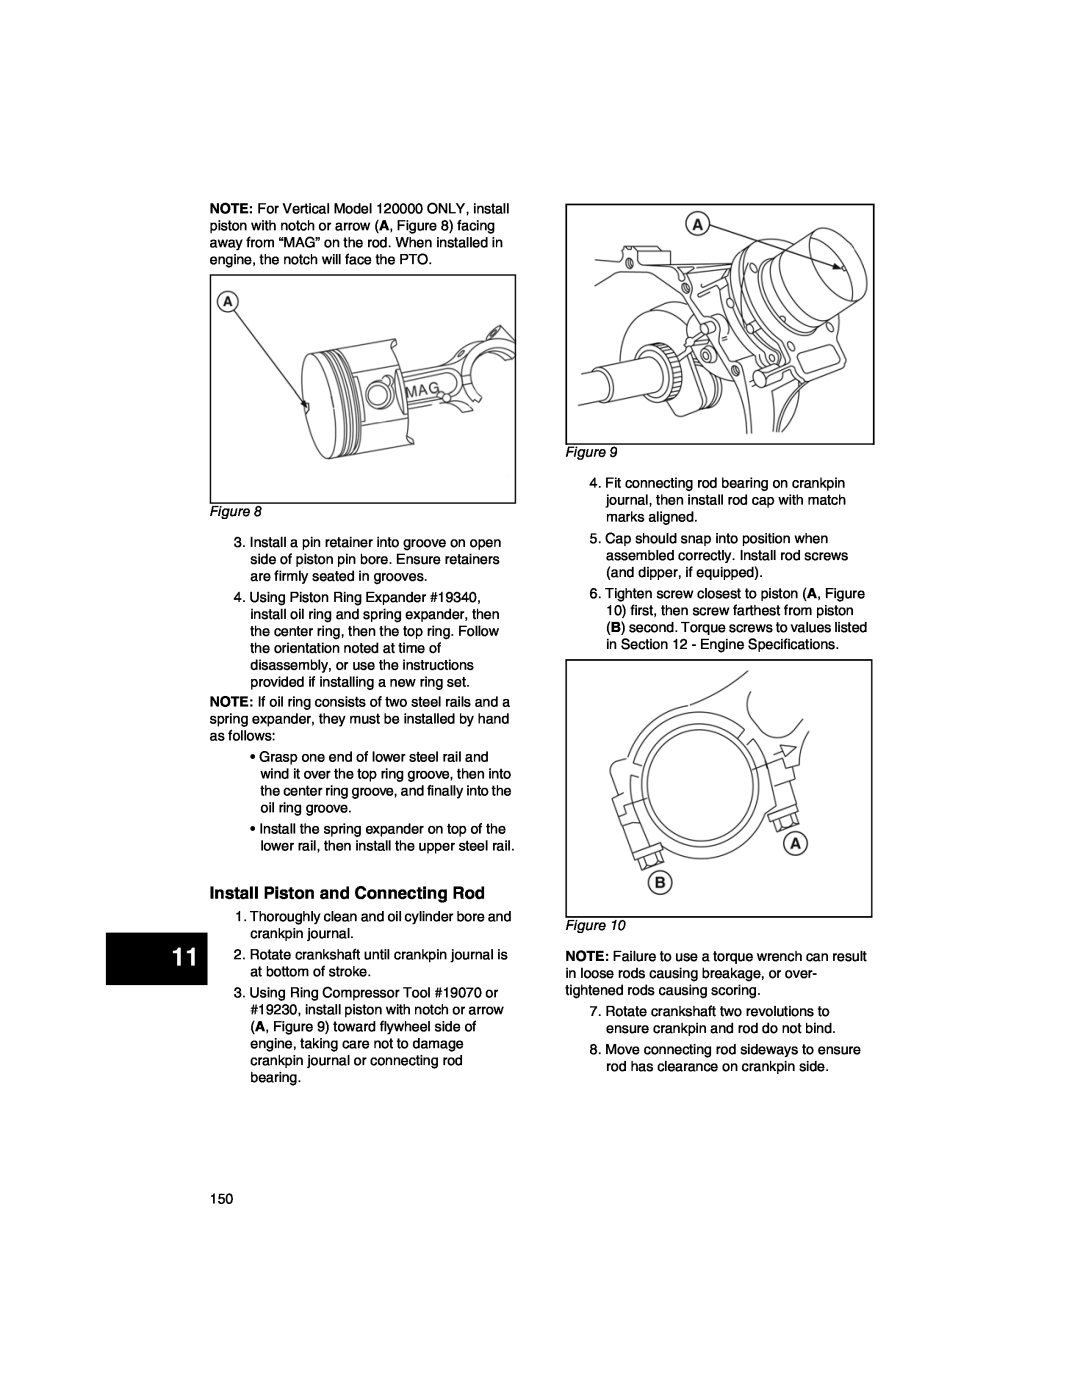 Briggs & Stratton 276535, 271172, 270962, CE8069, 273521 manual Install Piston and Connecting Rod 